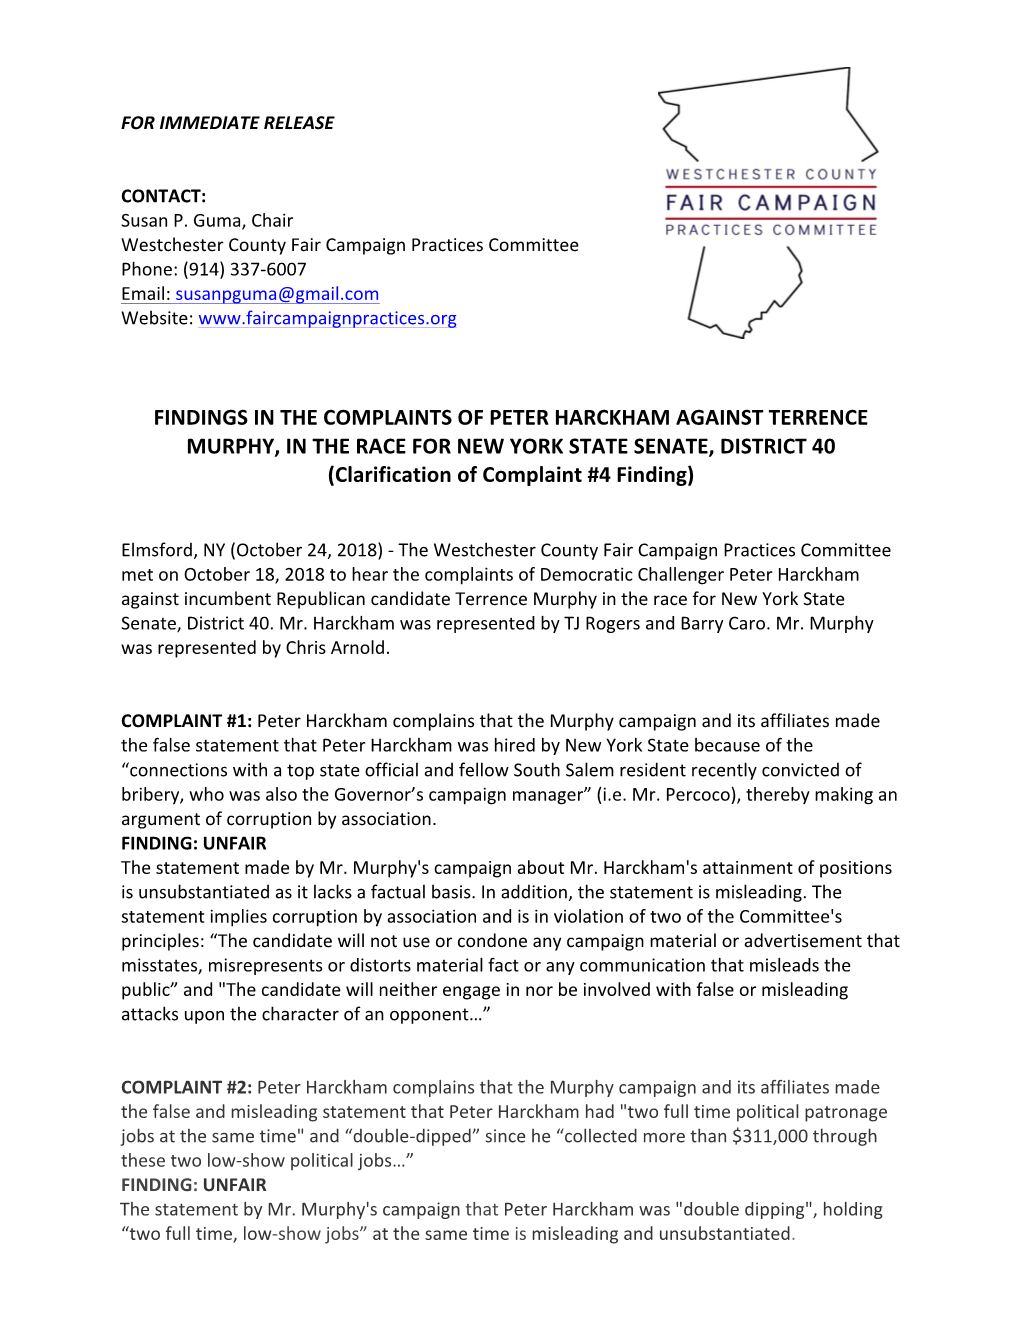 FINDINGS in the COMPLAINTS of PETER HARCKHAM AGAINST TERRENCE MURPHY, in the RACE for NEW YORK STATE SENATE, DISTRICT 40 (Clarification of Complaint #4 Finding)